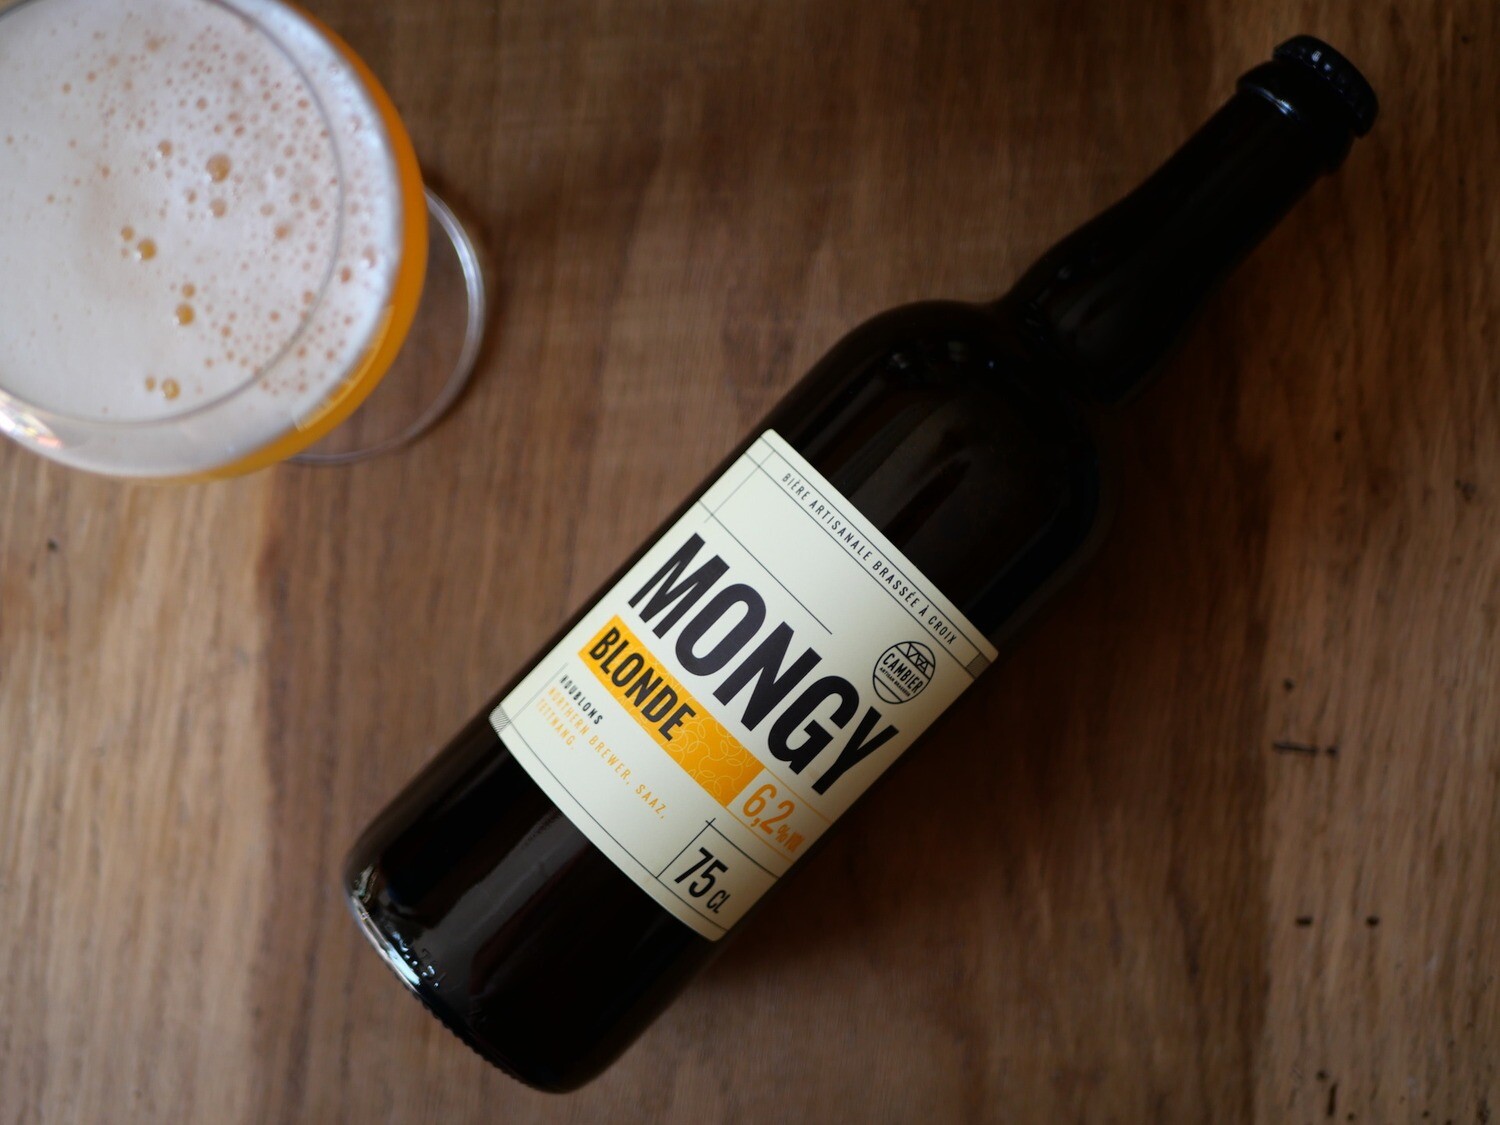 Mongy Blonde - Brasserie Cambier (75 cl)